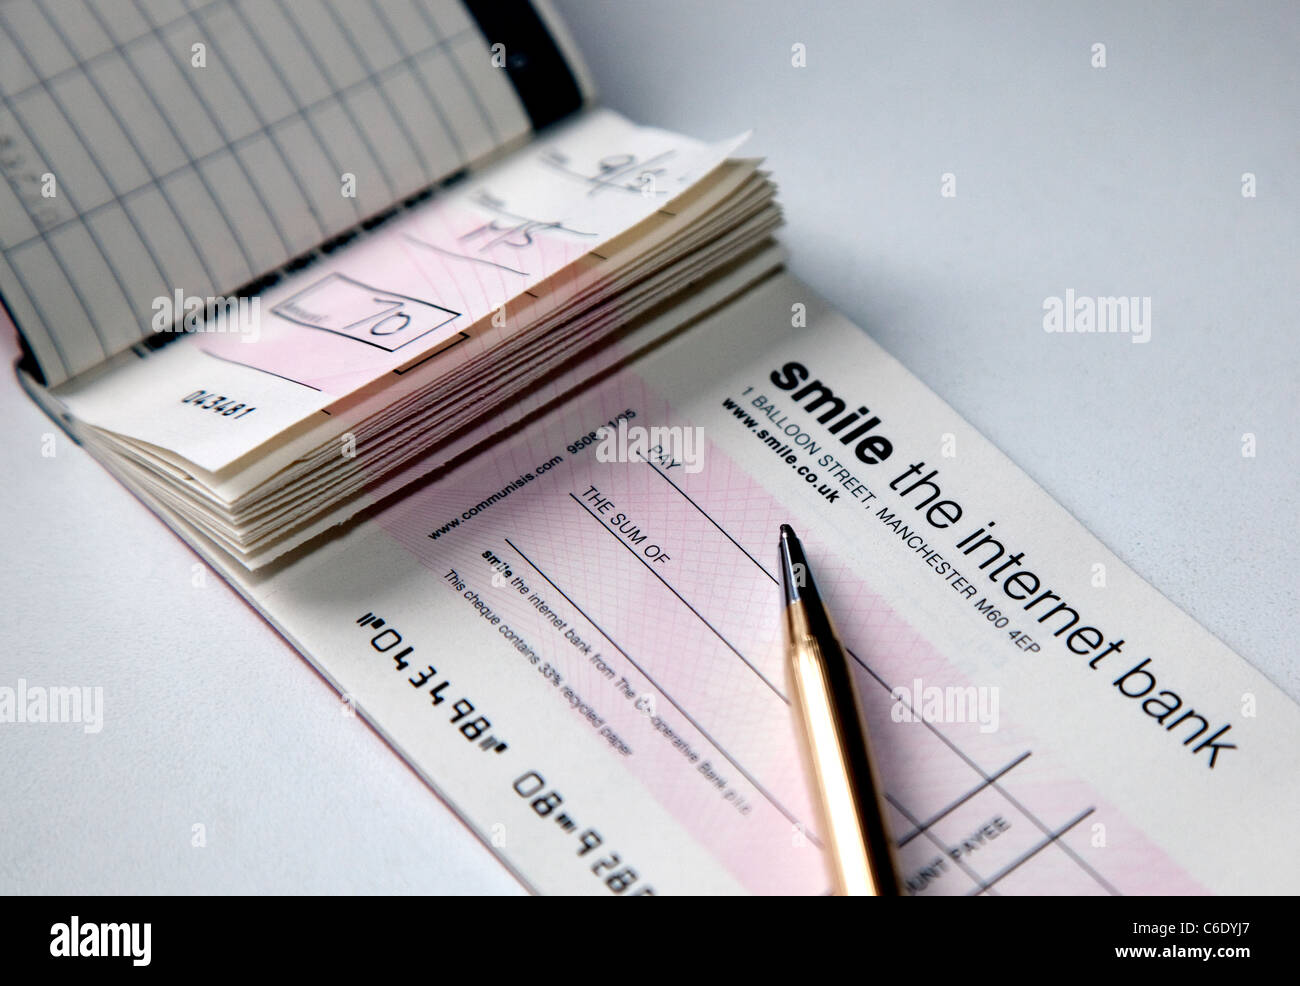 Cheque book and pen, London Stock Photo